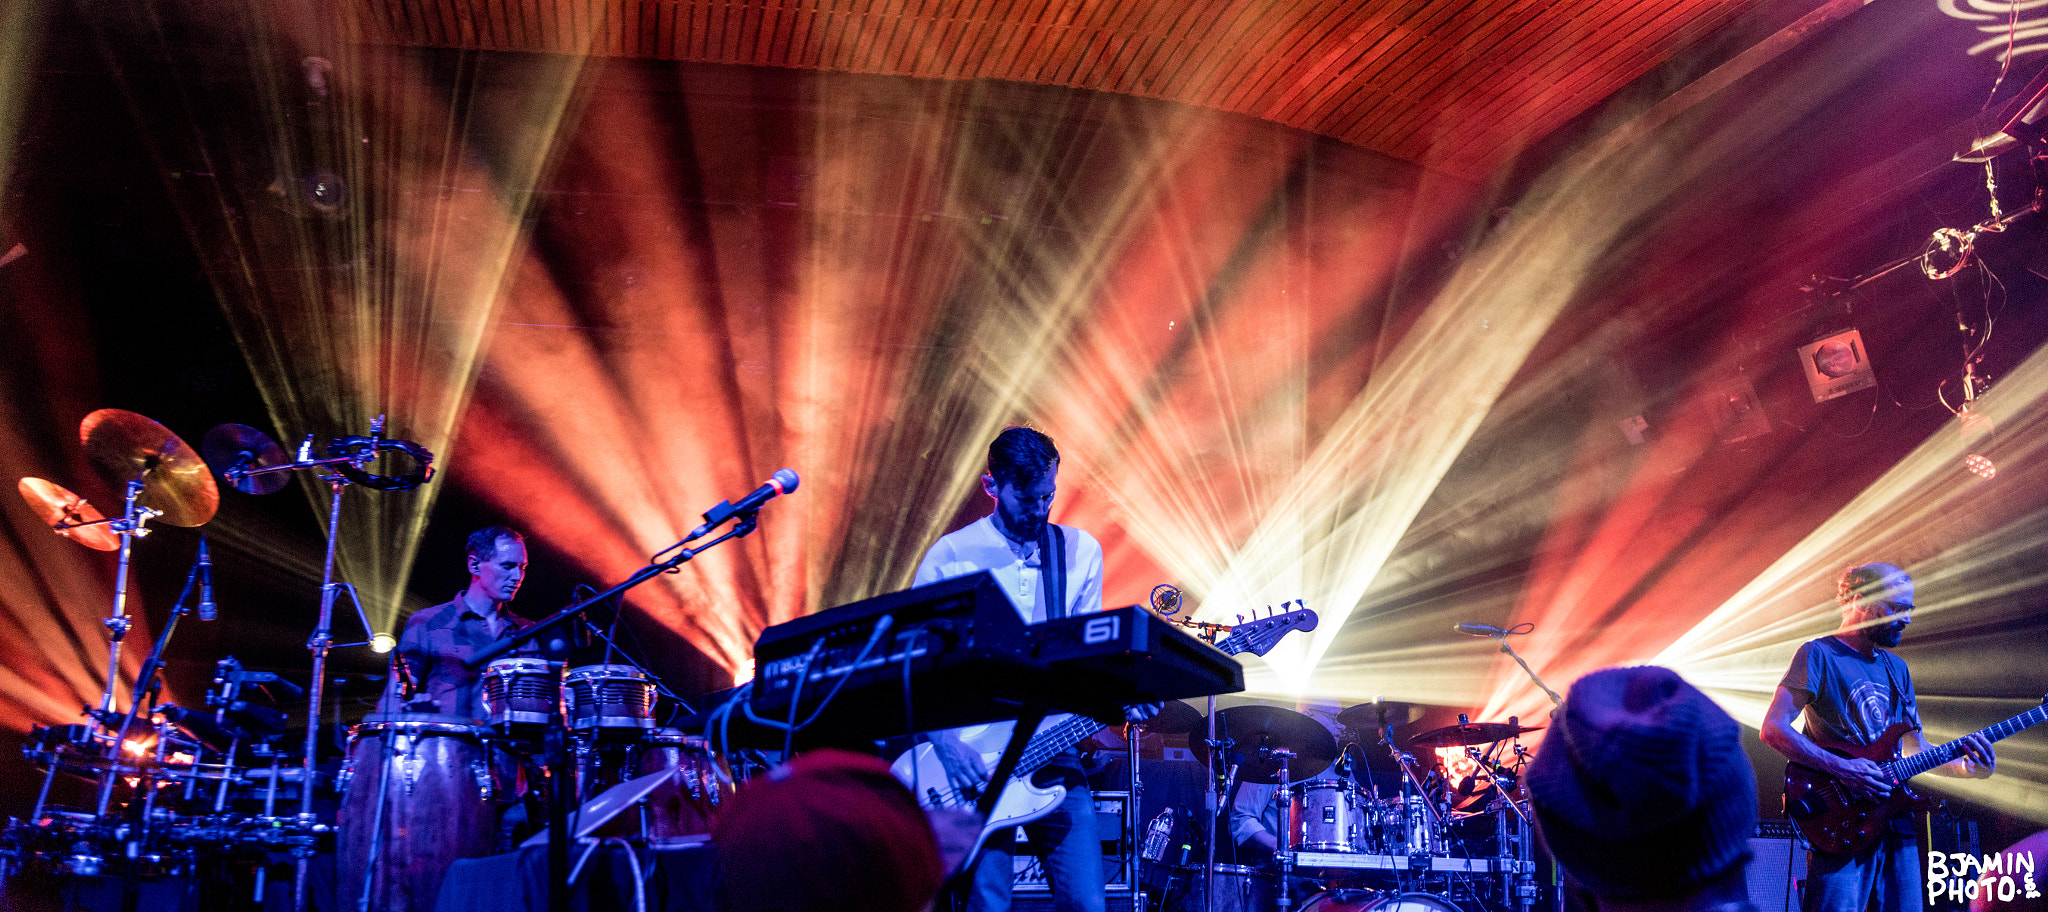 Pentax K-1 sample photo. Lotus pano at the independent sf photography